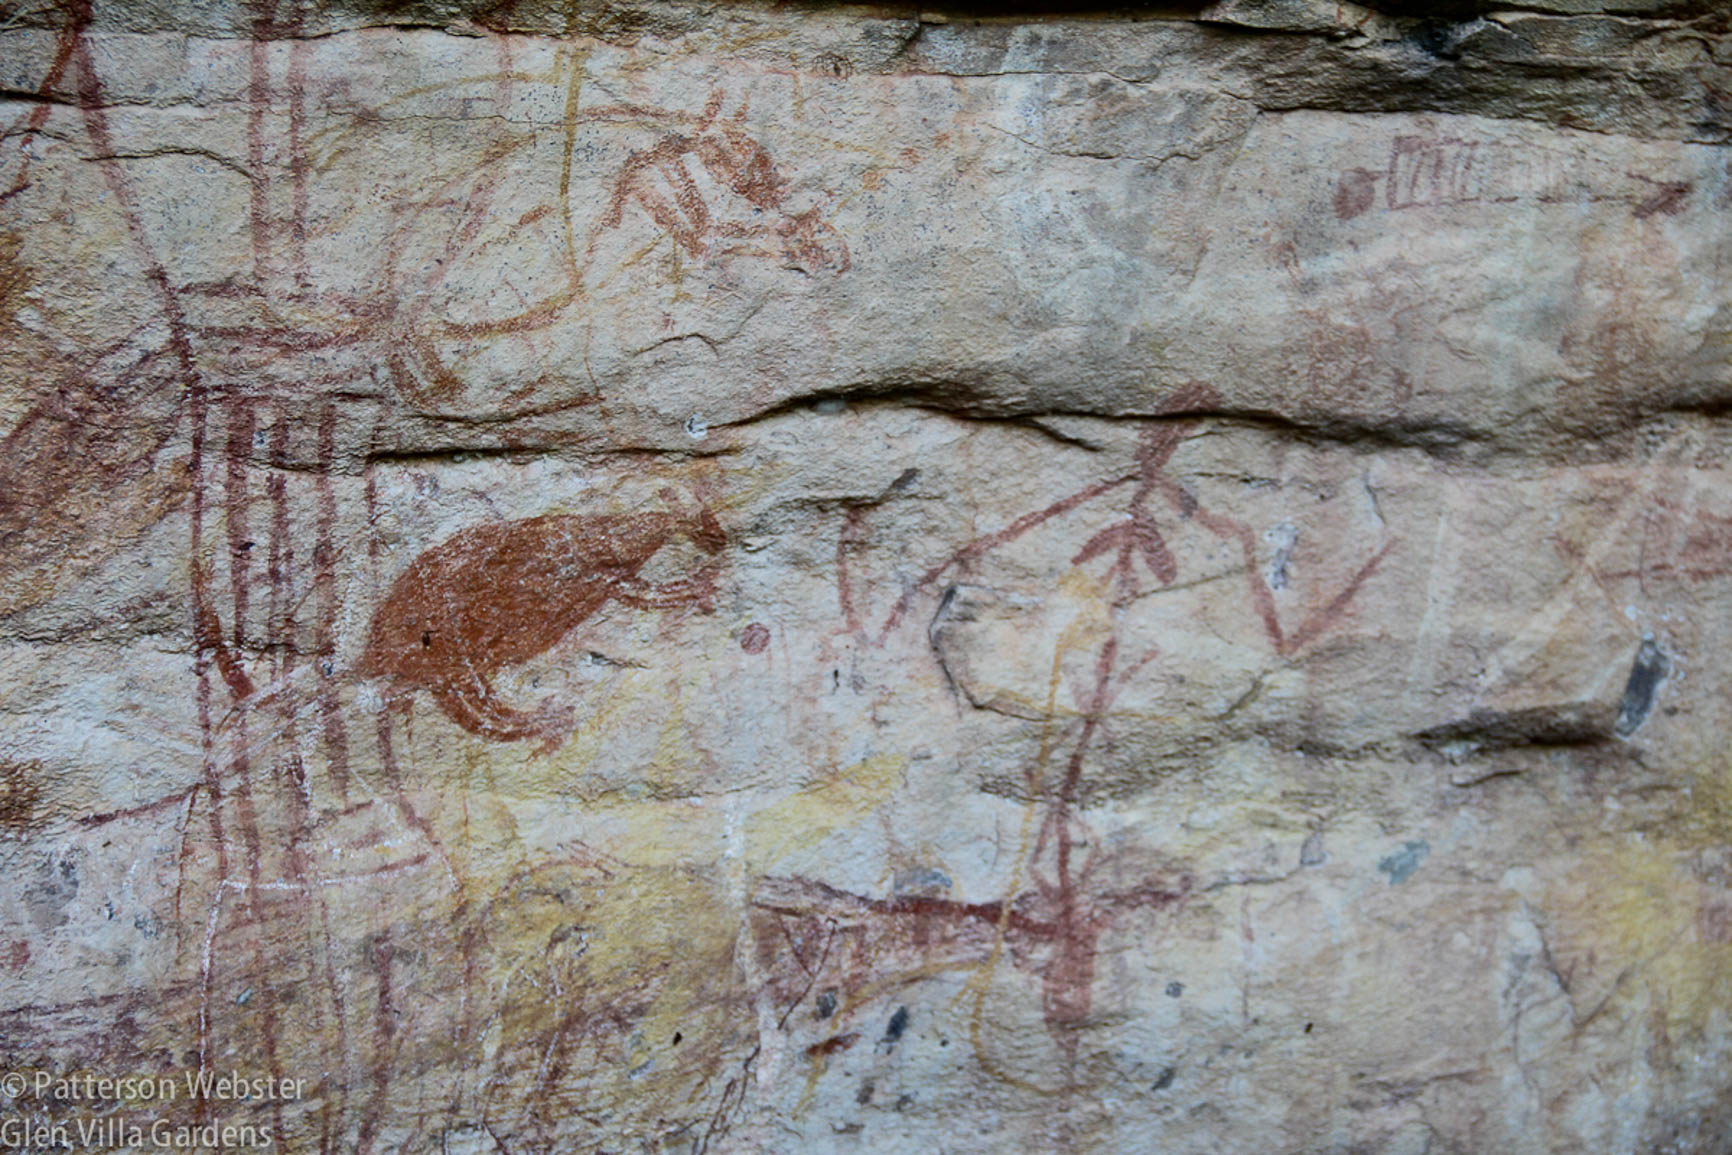 Animals and humans mix in this painting from Kakadu.